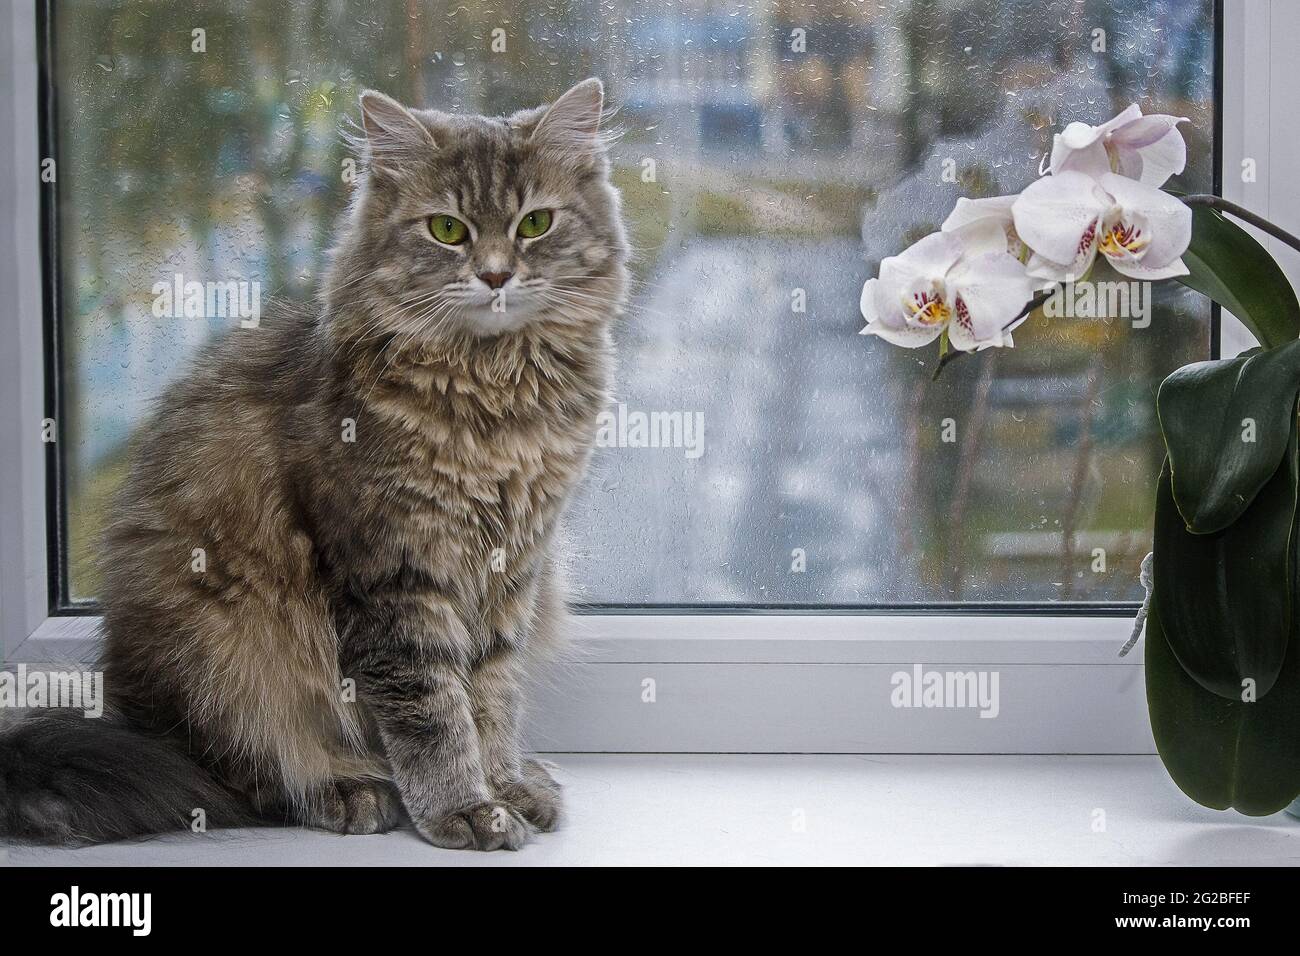 Adorable cat posing on a balcony with flowers Stock Photo